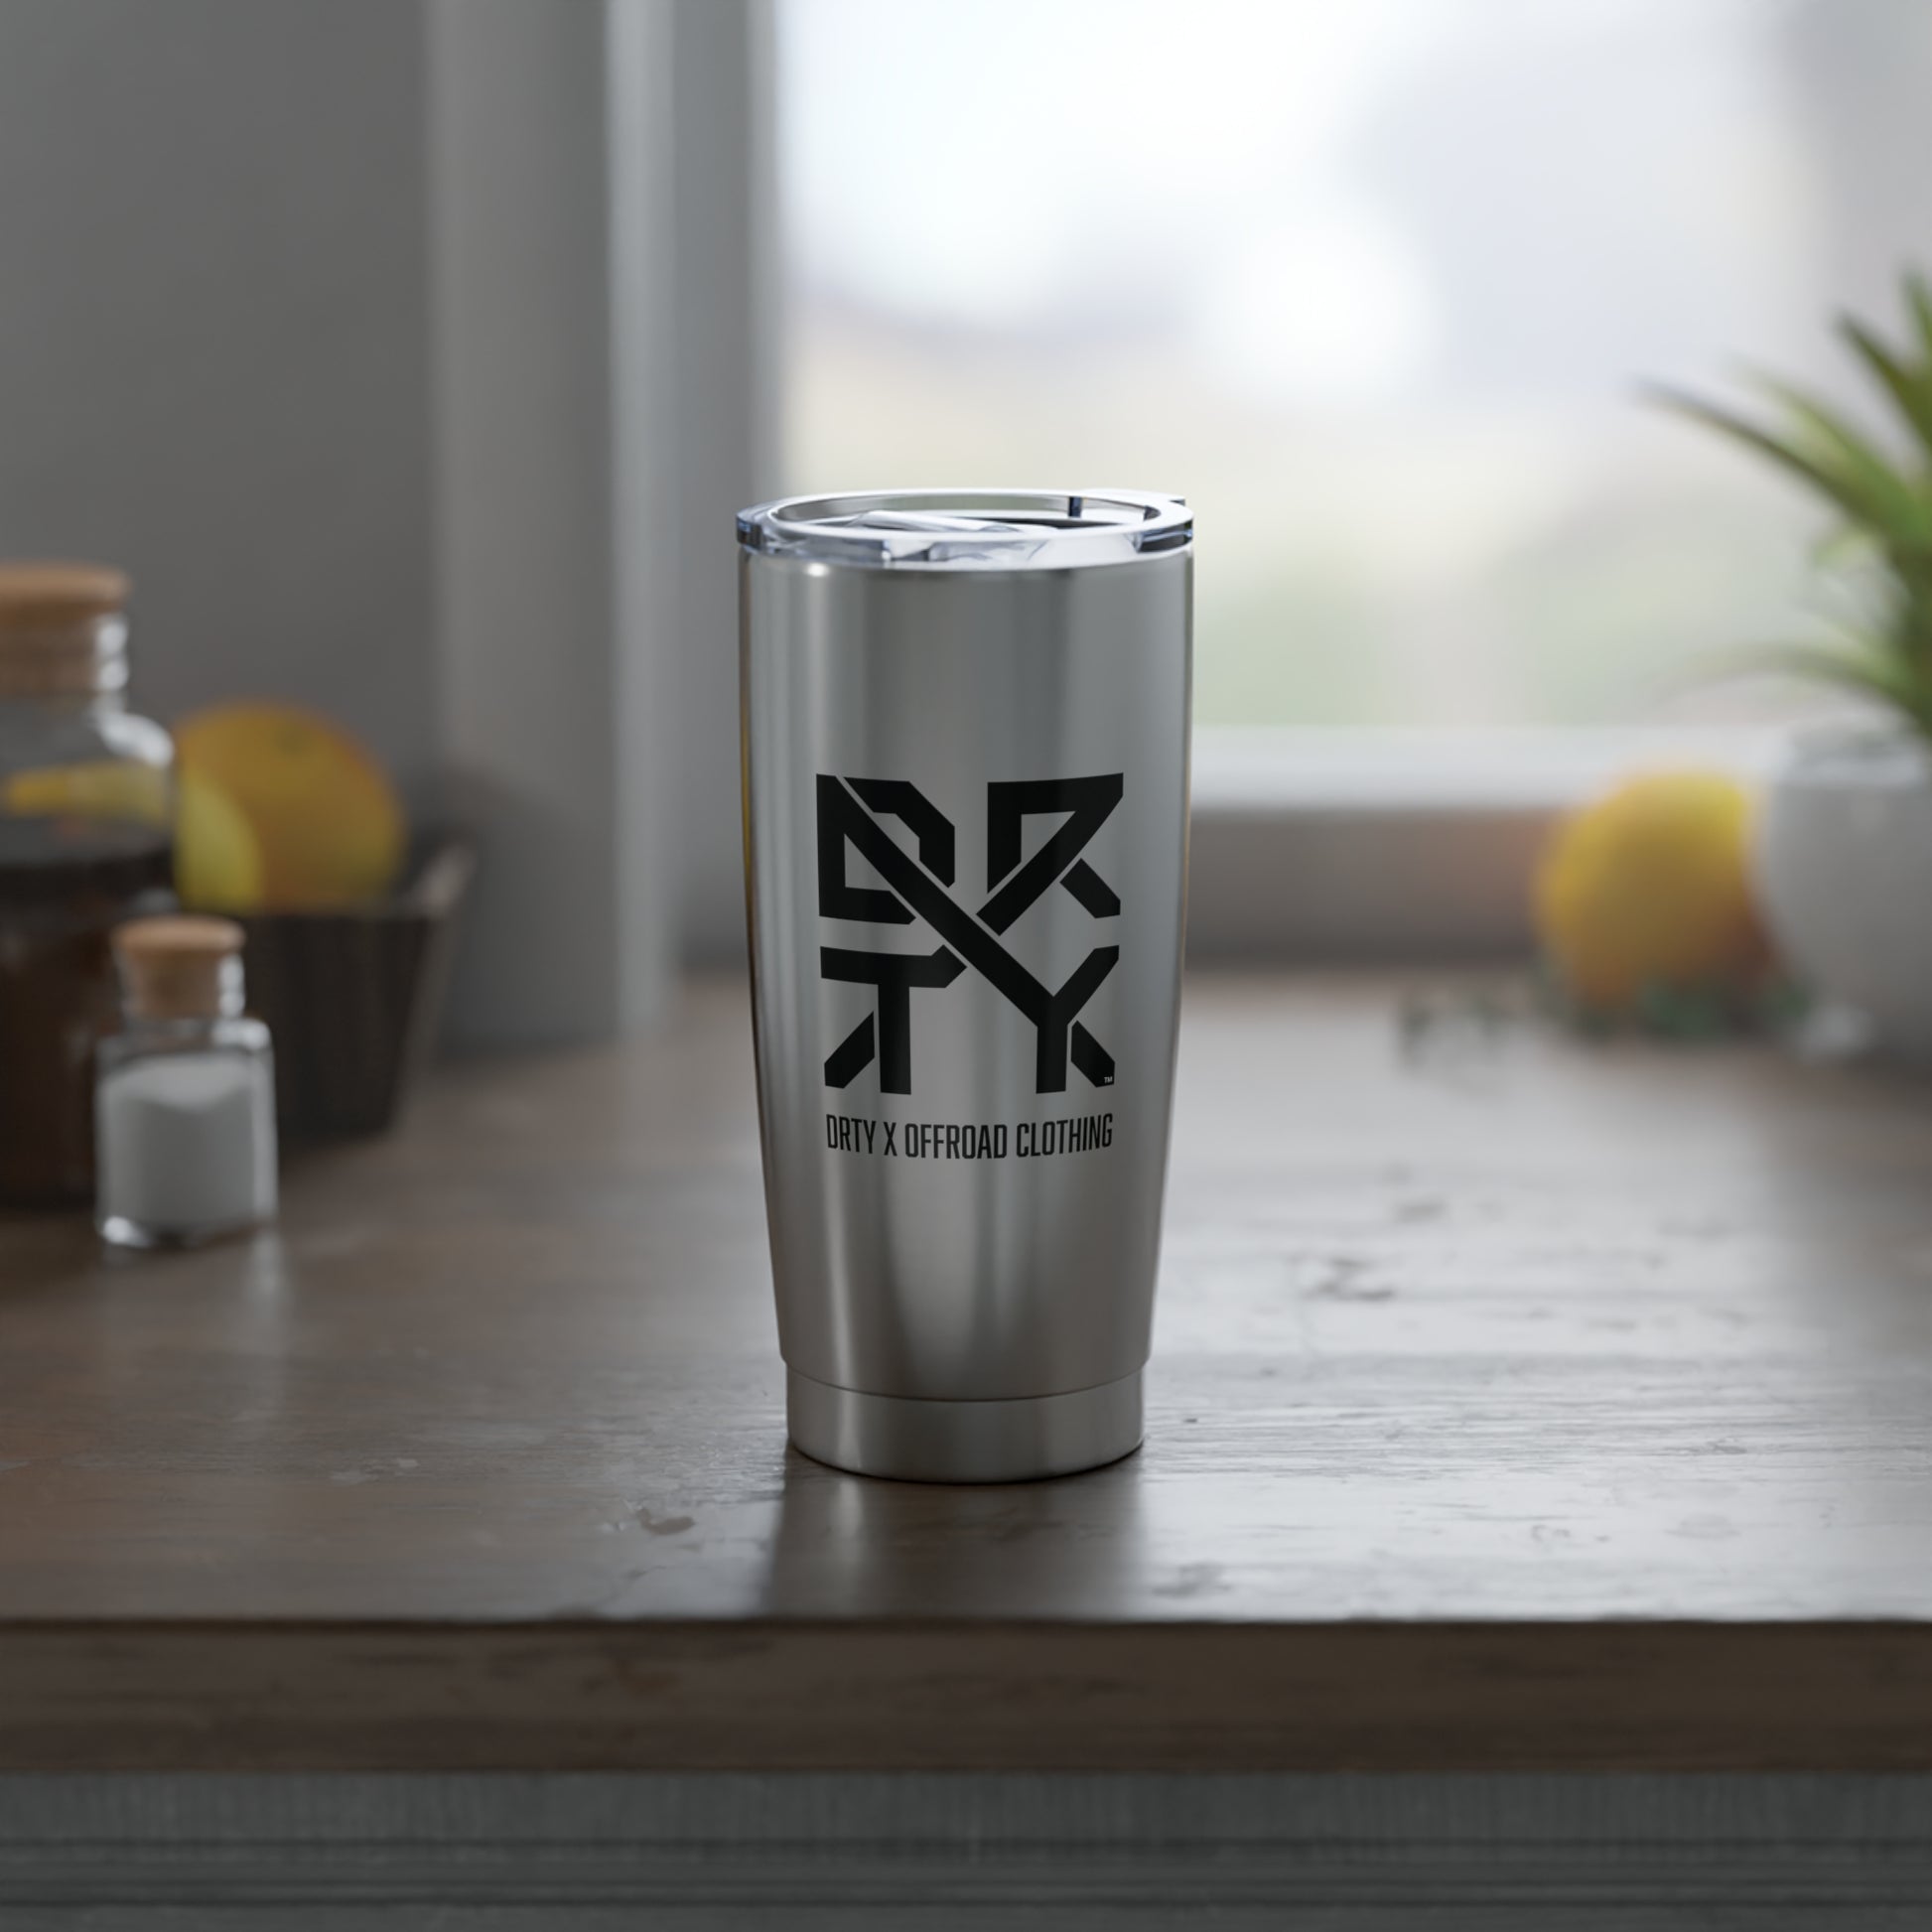 This is a front view of a DRTY X branded stainless steel tumbler on a table.